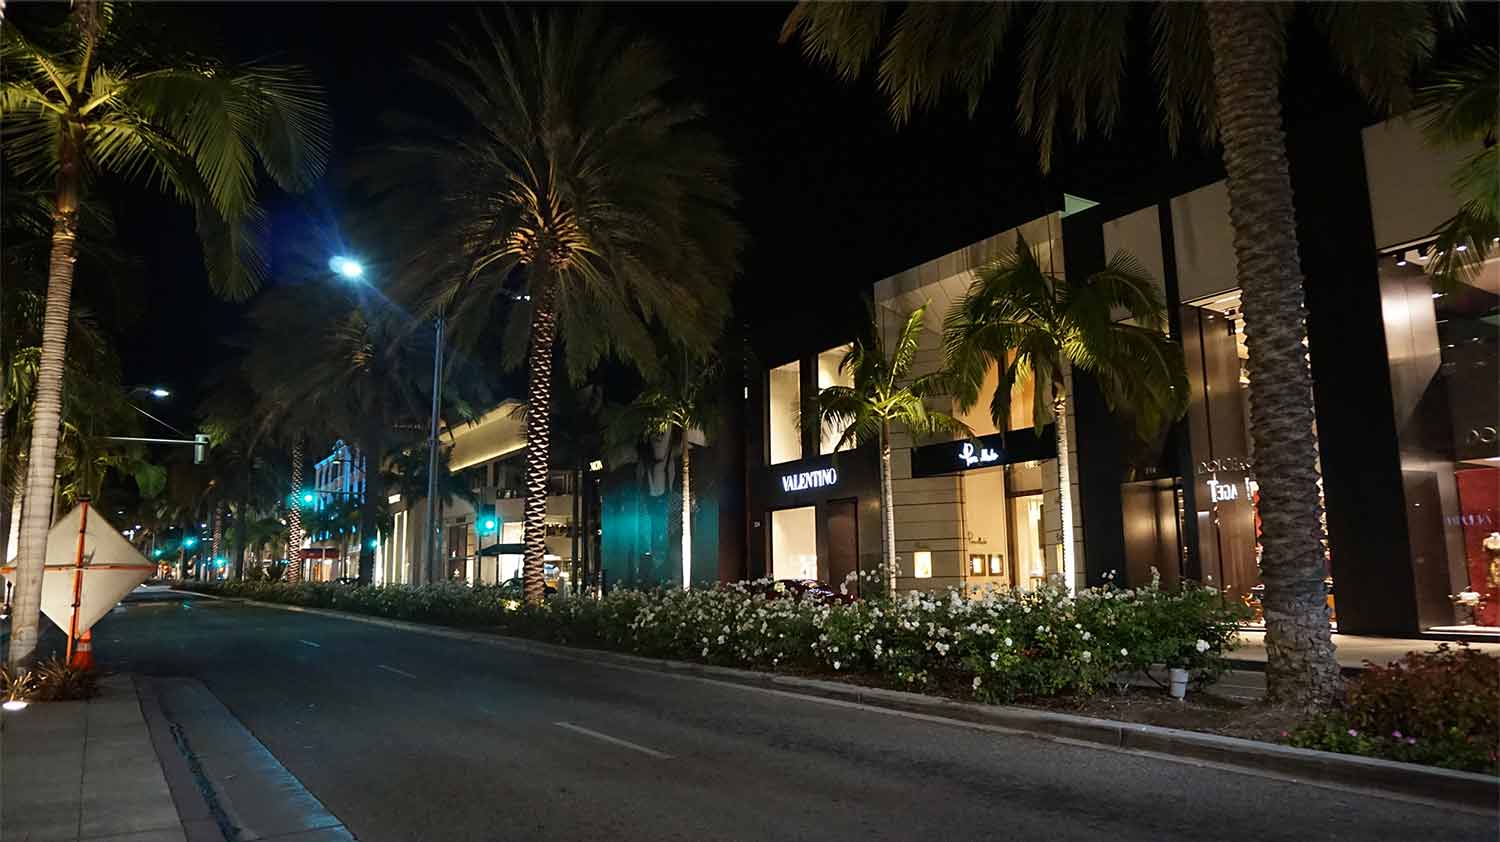 Rodeo drive, Los Angeles, USA